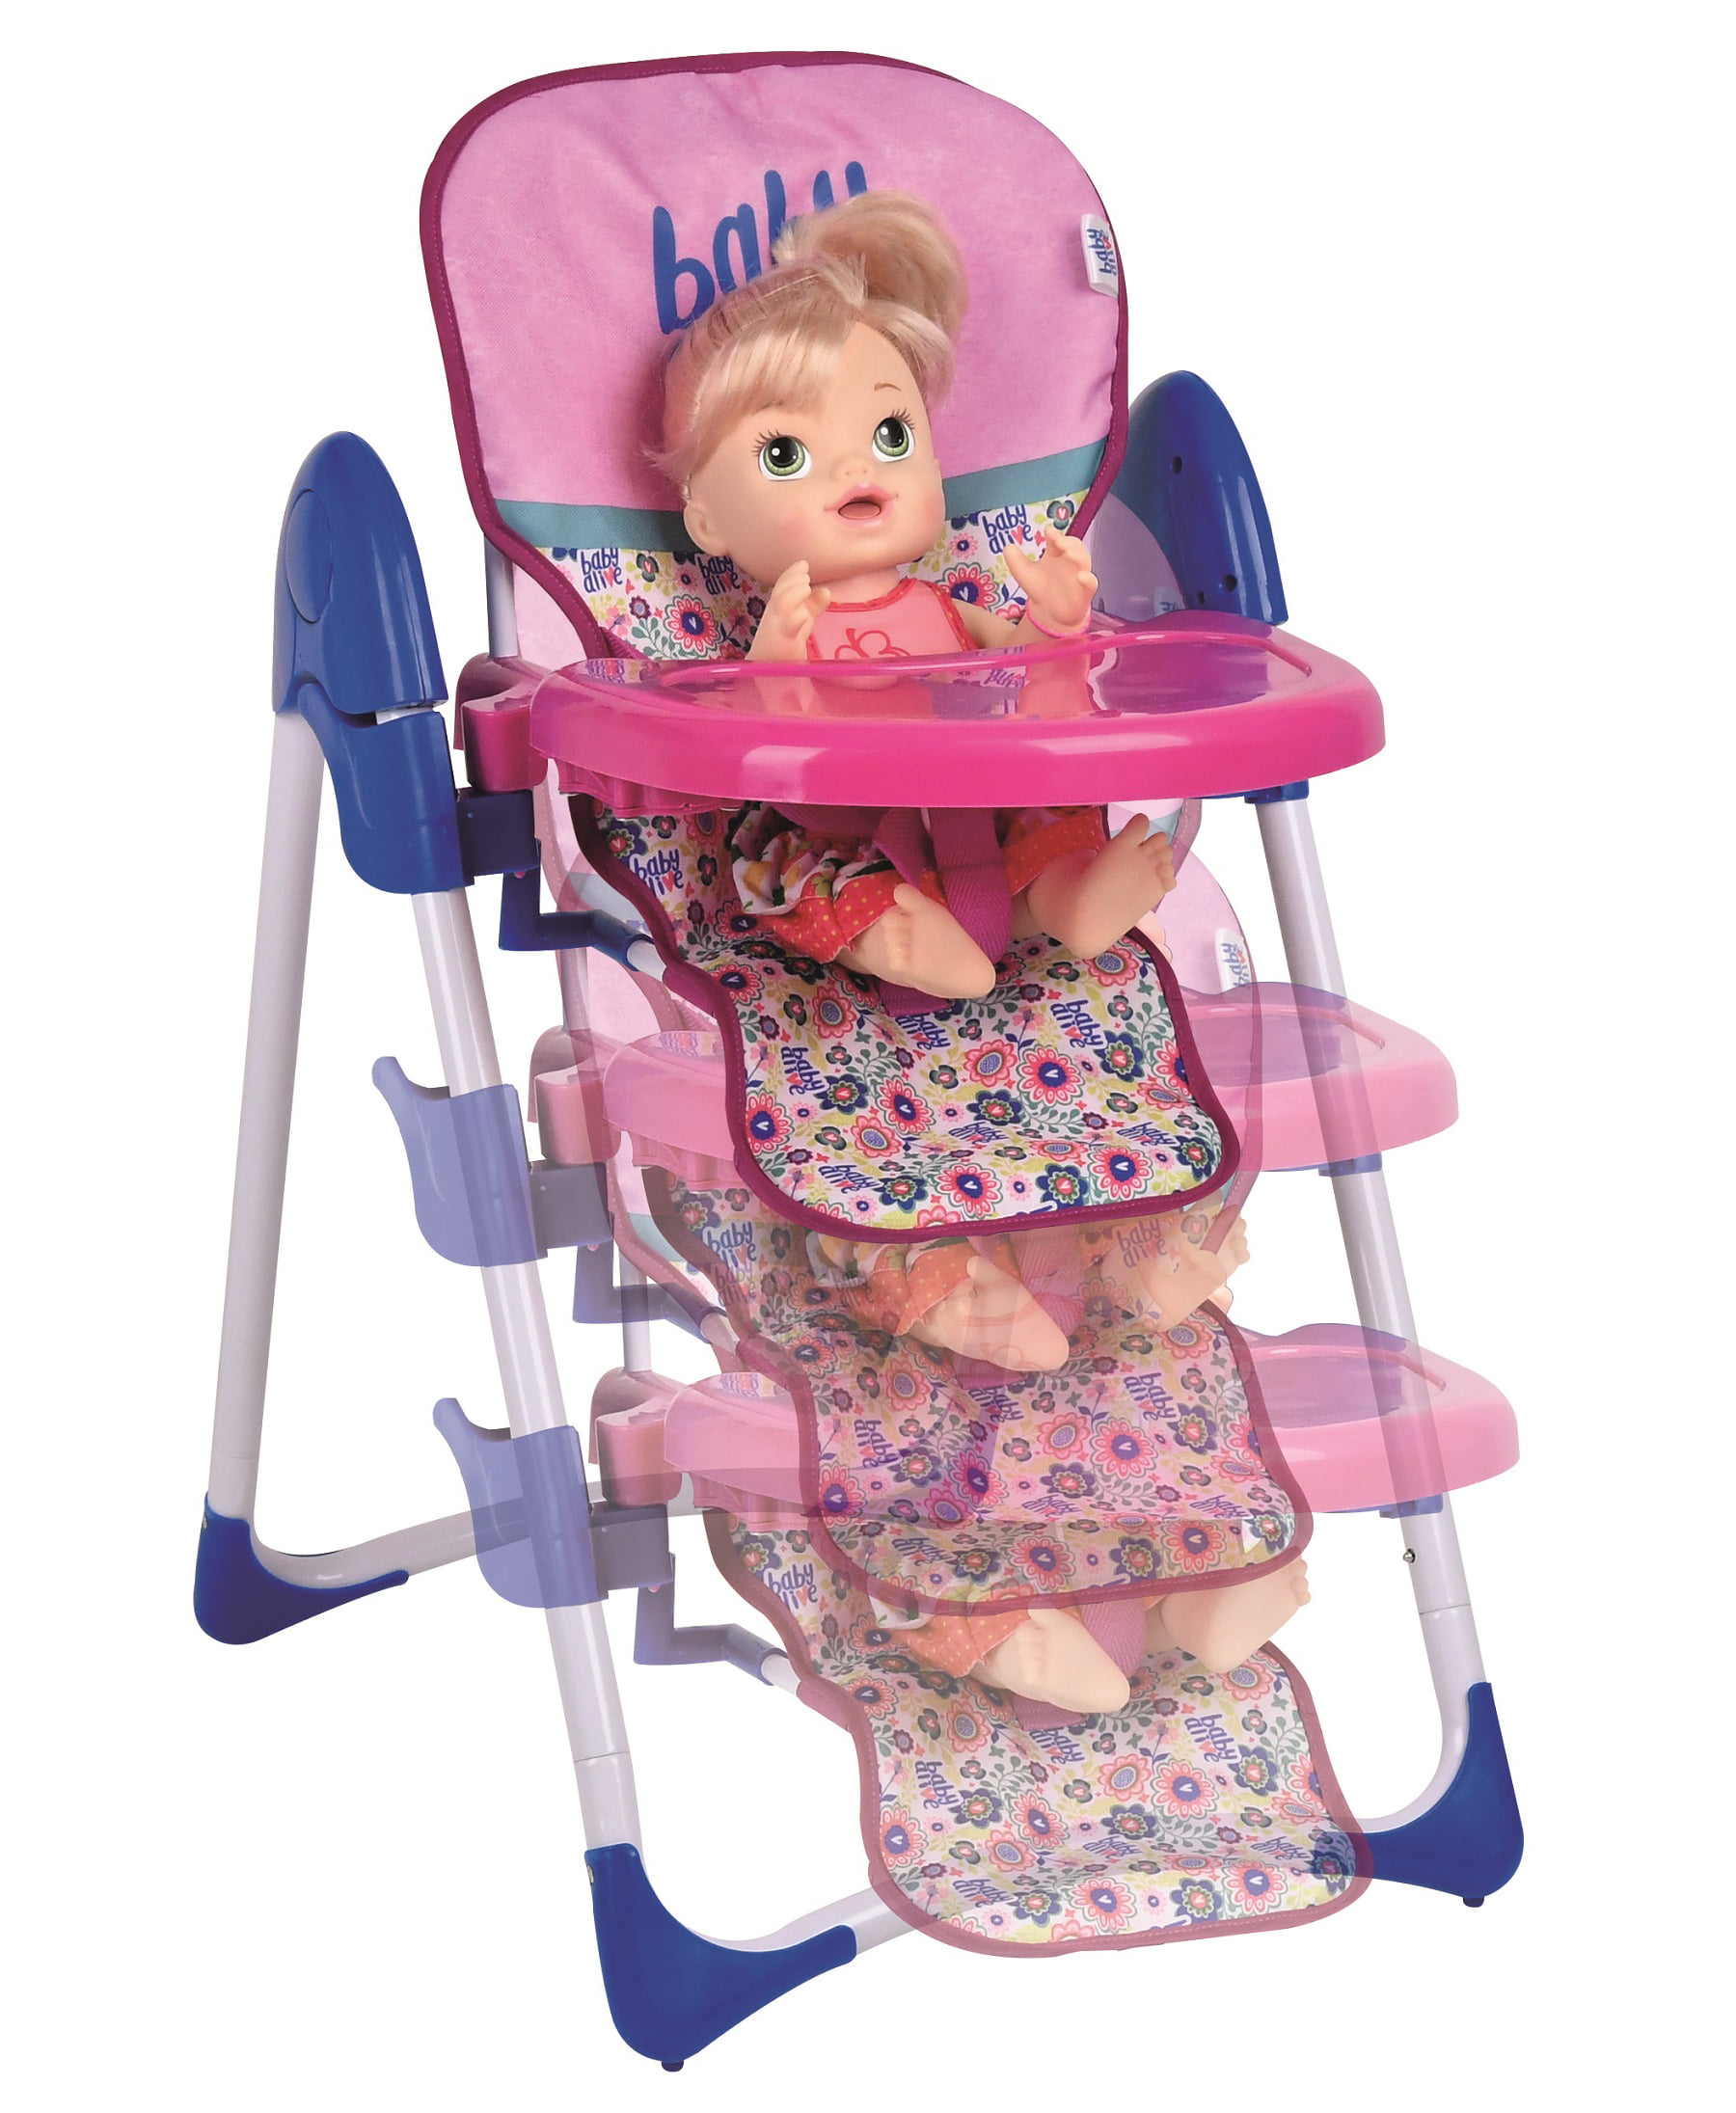 baby alive high chair